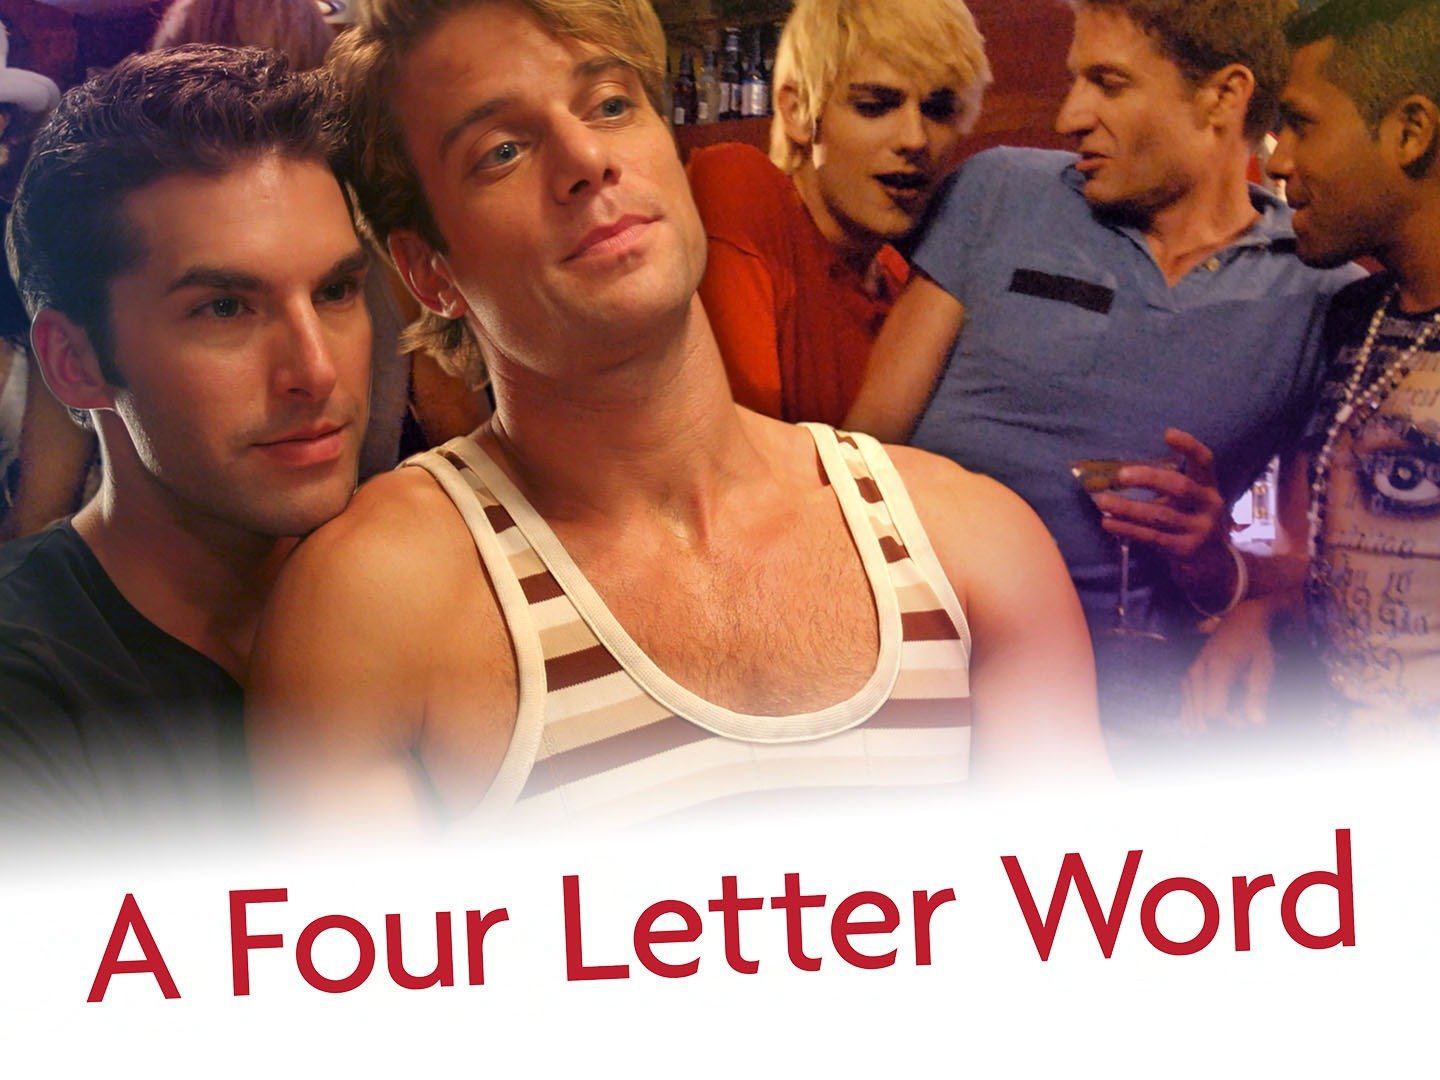 A Four Letter Word Movie Reviews